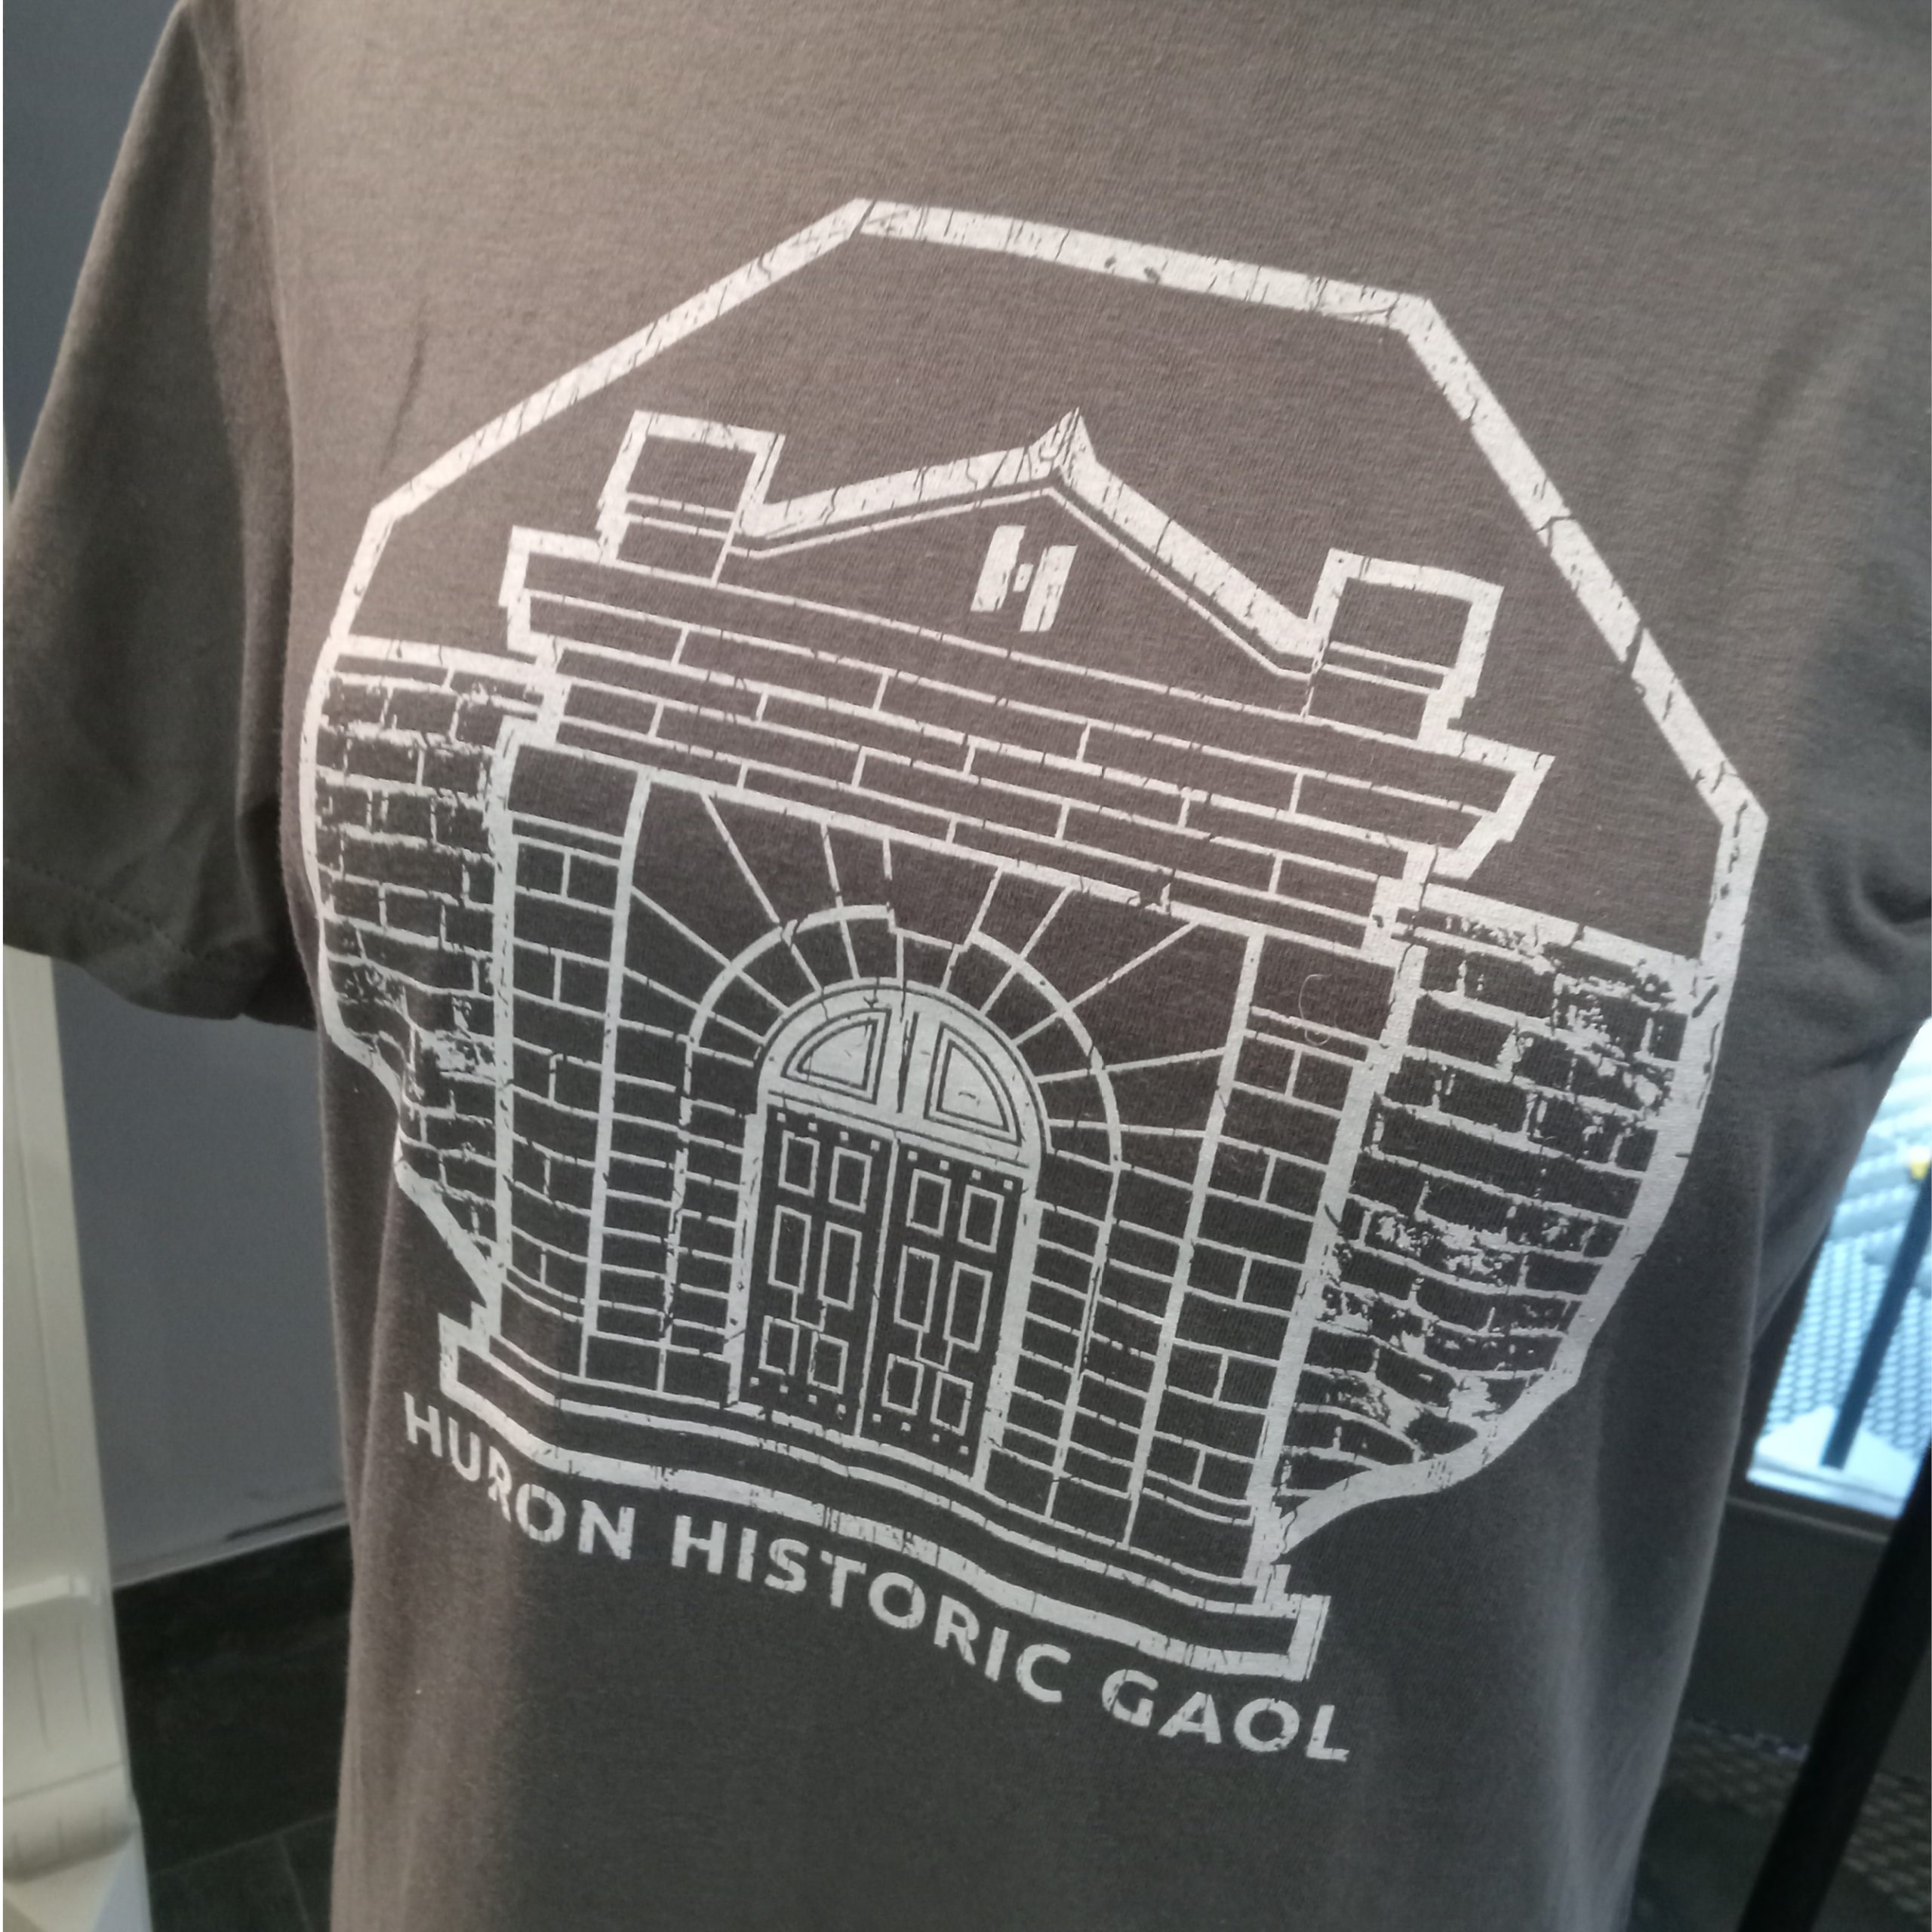 Image of Huron Historic Gaol t-shirt with illustration of Gaol front entrance